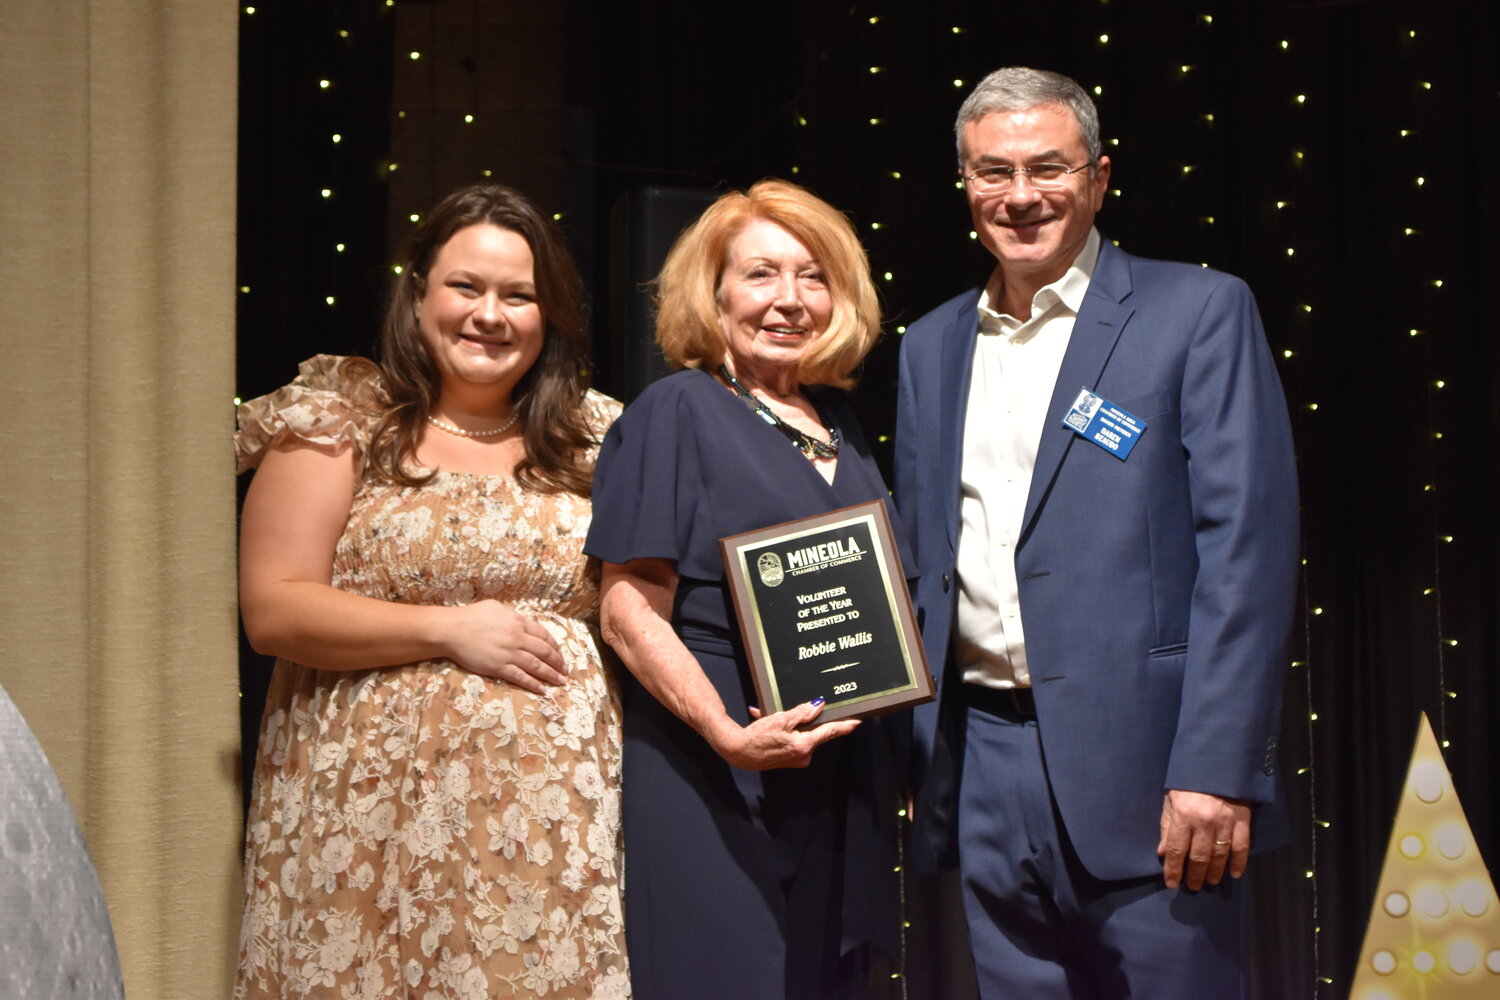 Mineola Chamber of Commerce Volunteer of the Year is Robbie Wallis, center, congratulated by President Kelsie McGilvray and Vice President Daren Beaudo at last week’s annual banquet.